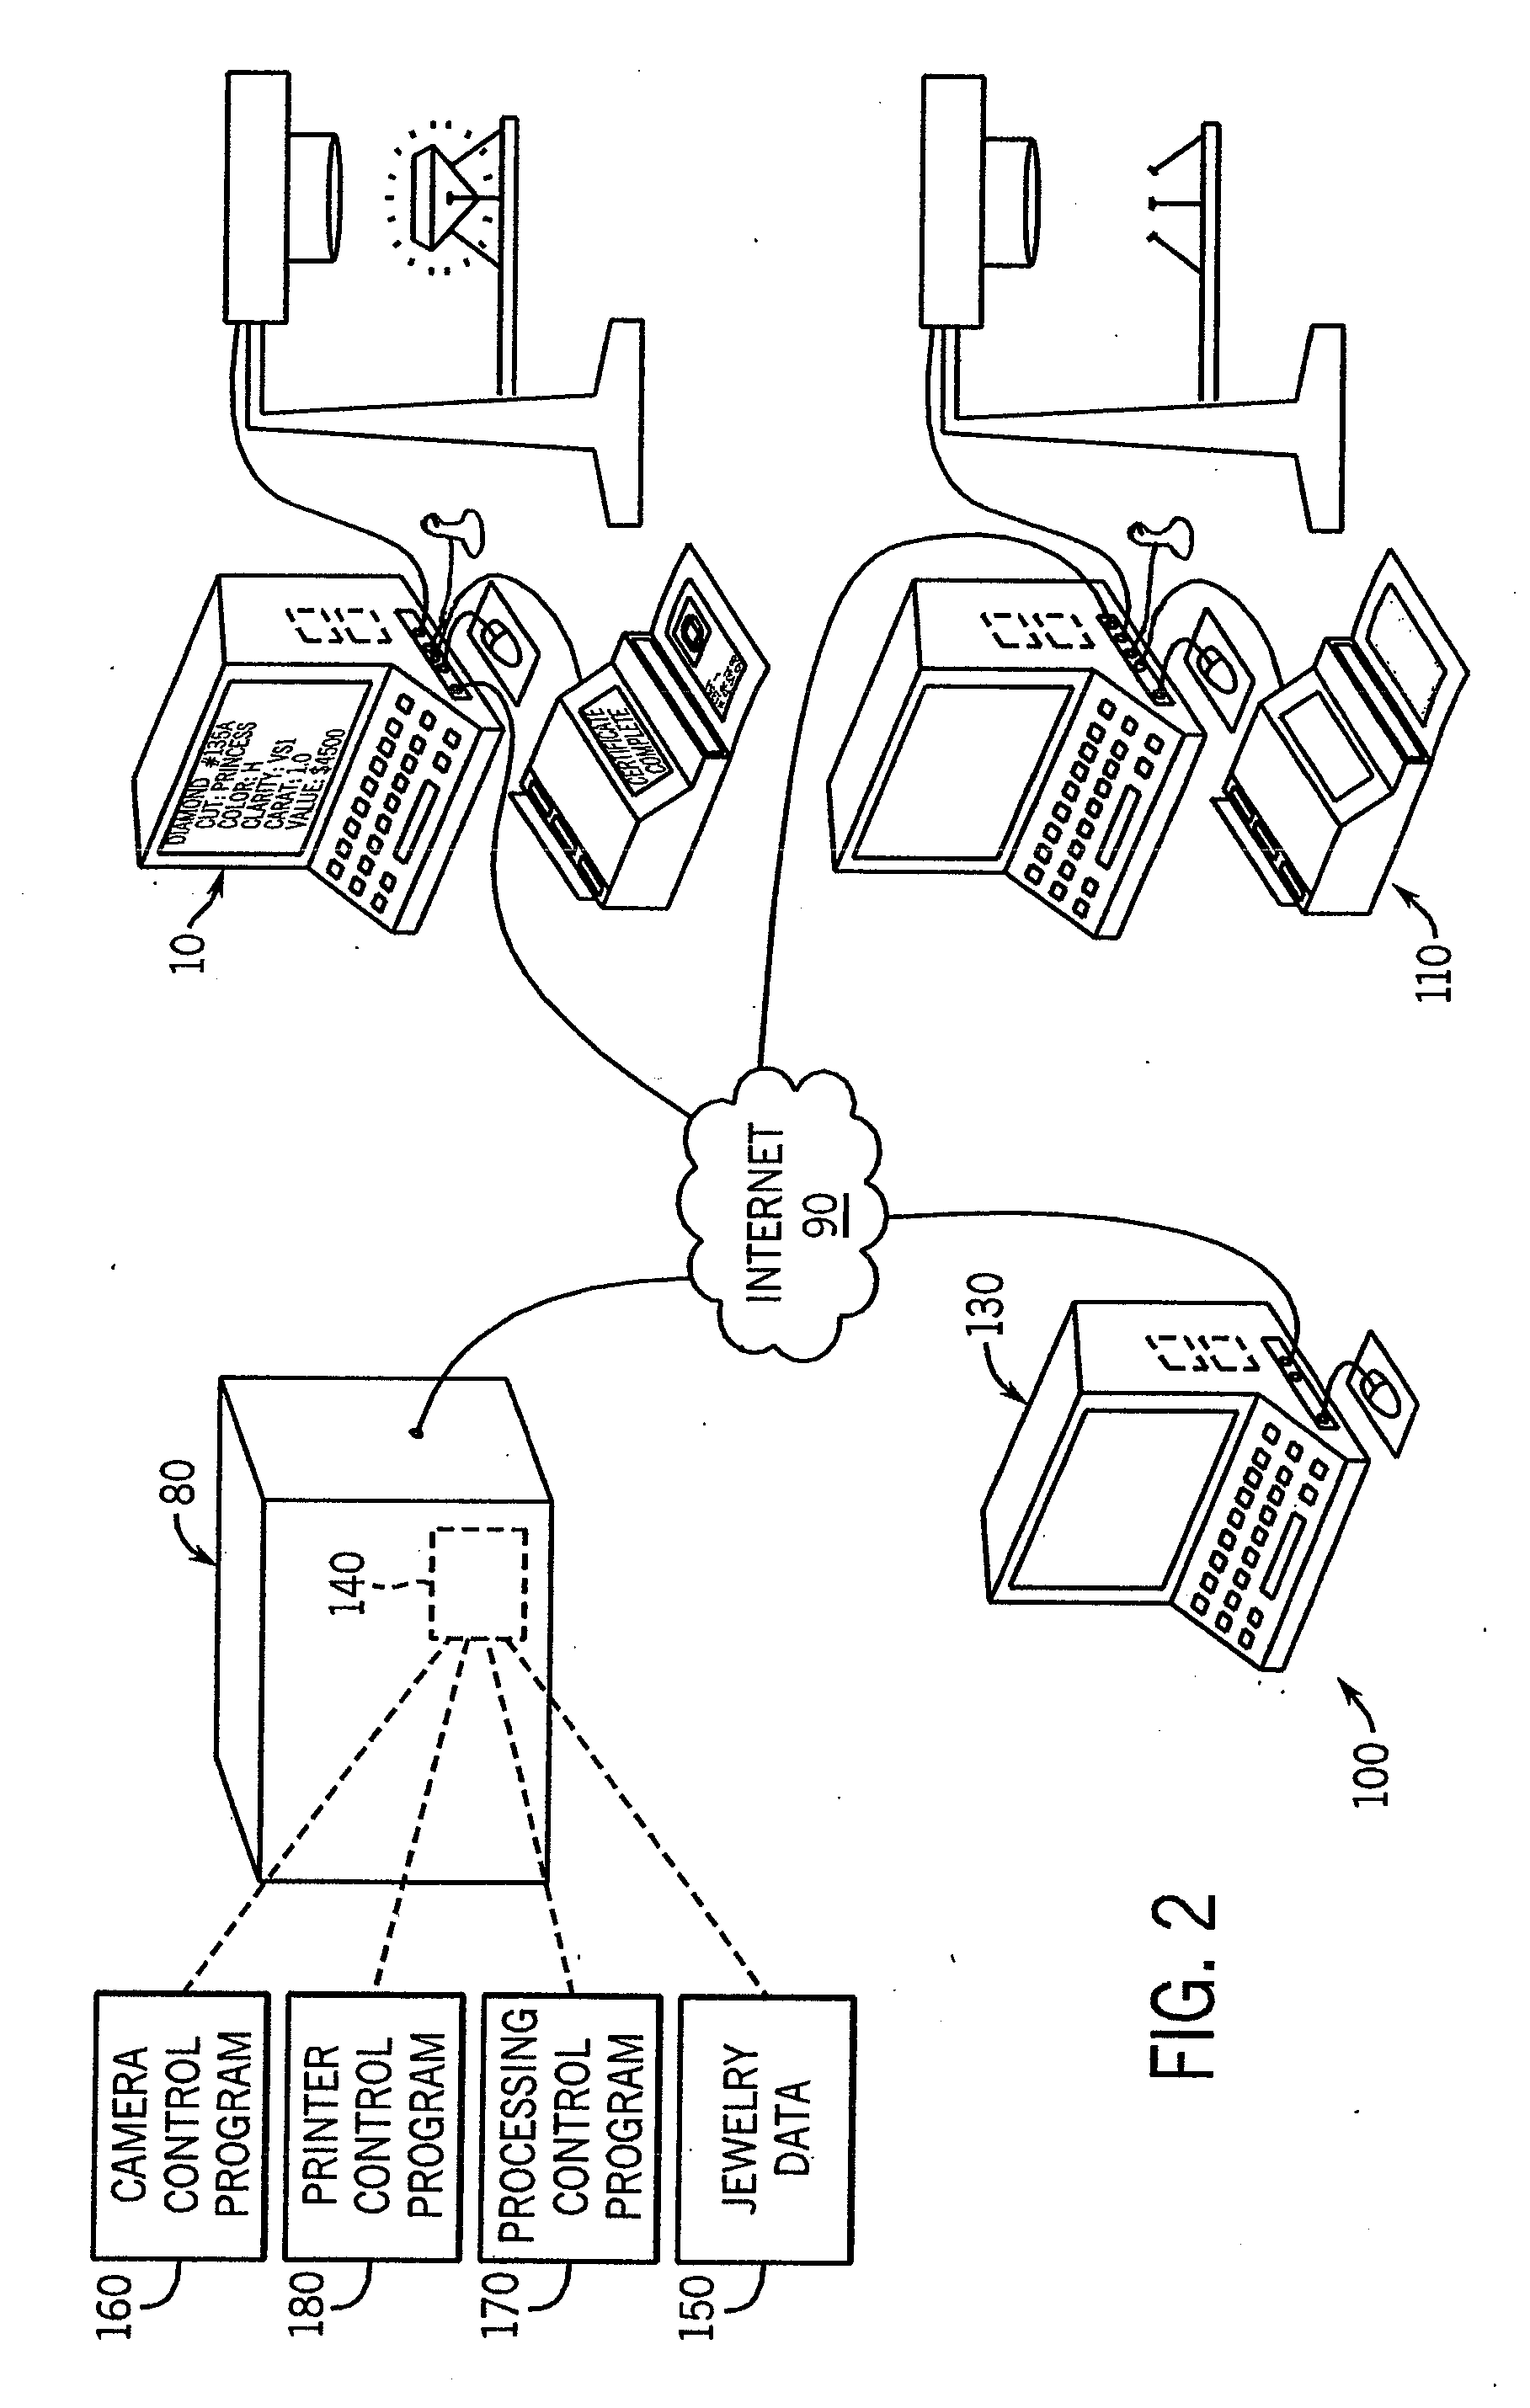 Method and System for Facilitating Verification of Ownership Status of a Jewelry-Related Item